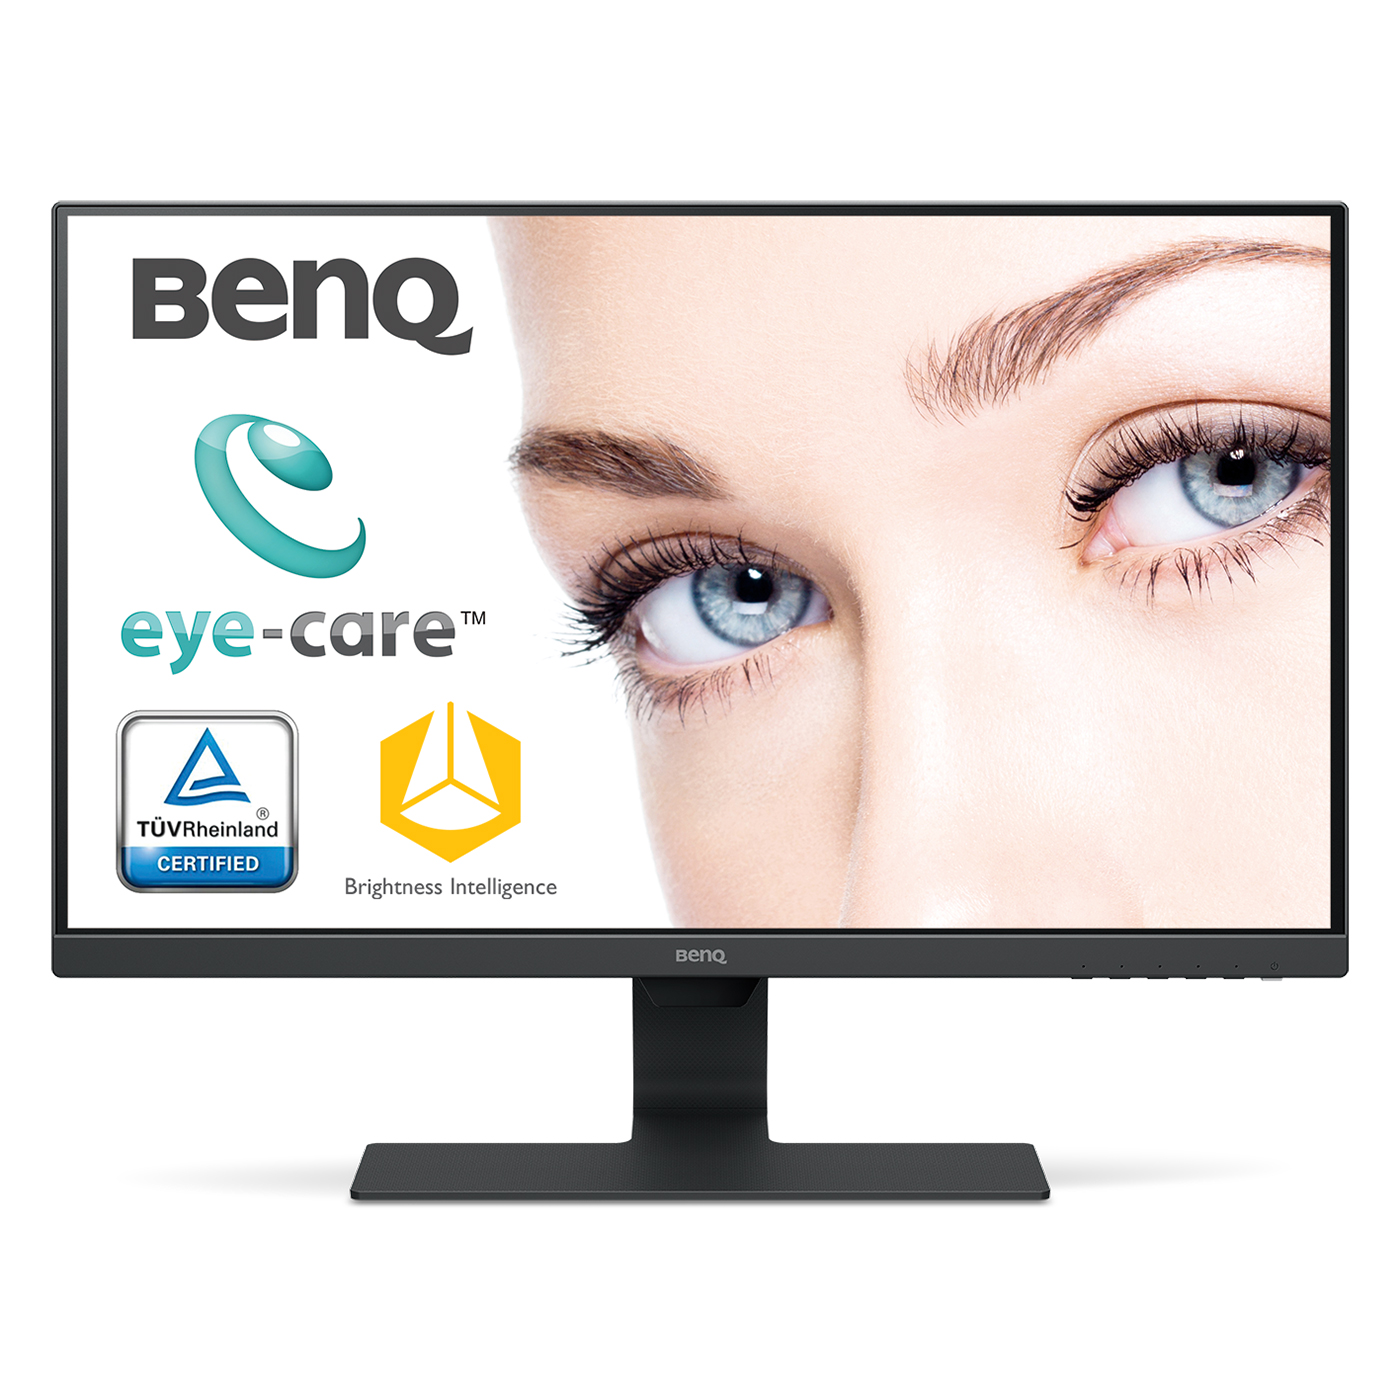 Gw2780 27 1080p Ips Monitor For Movie Watching With Eye Care Technology L Benq Benq Au